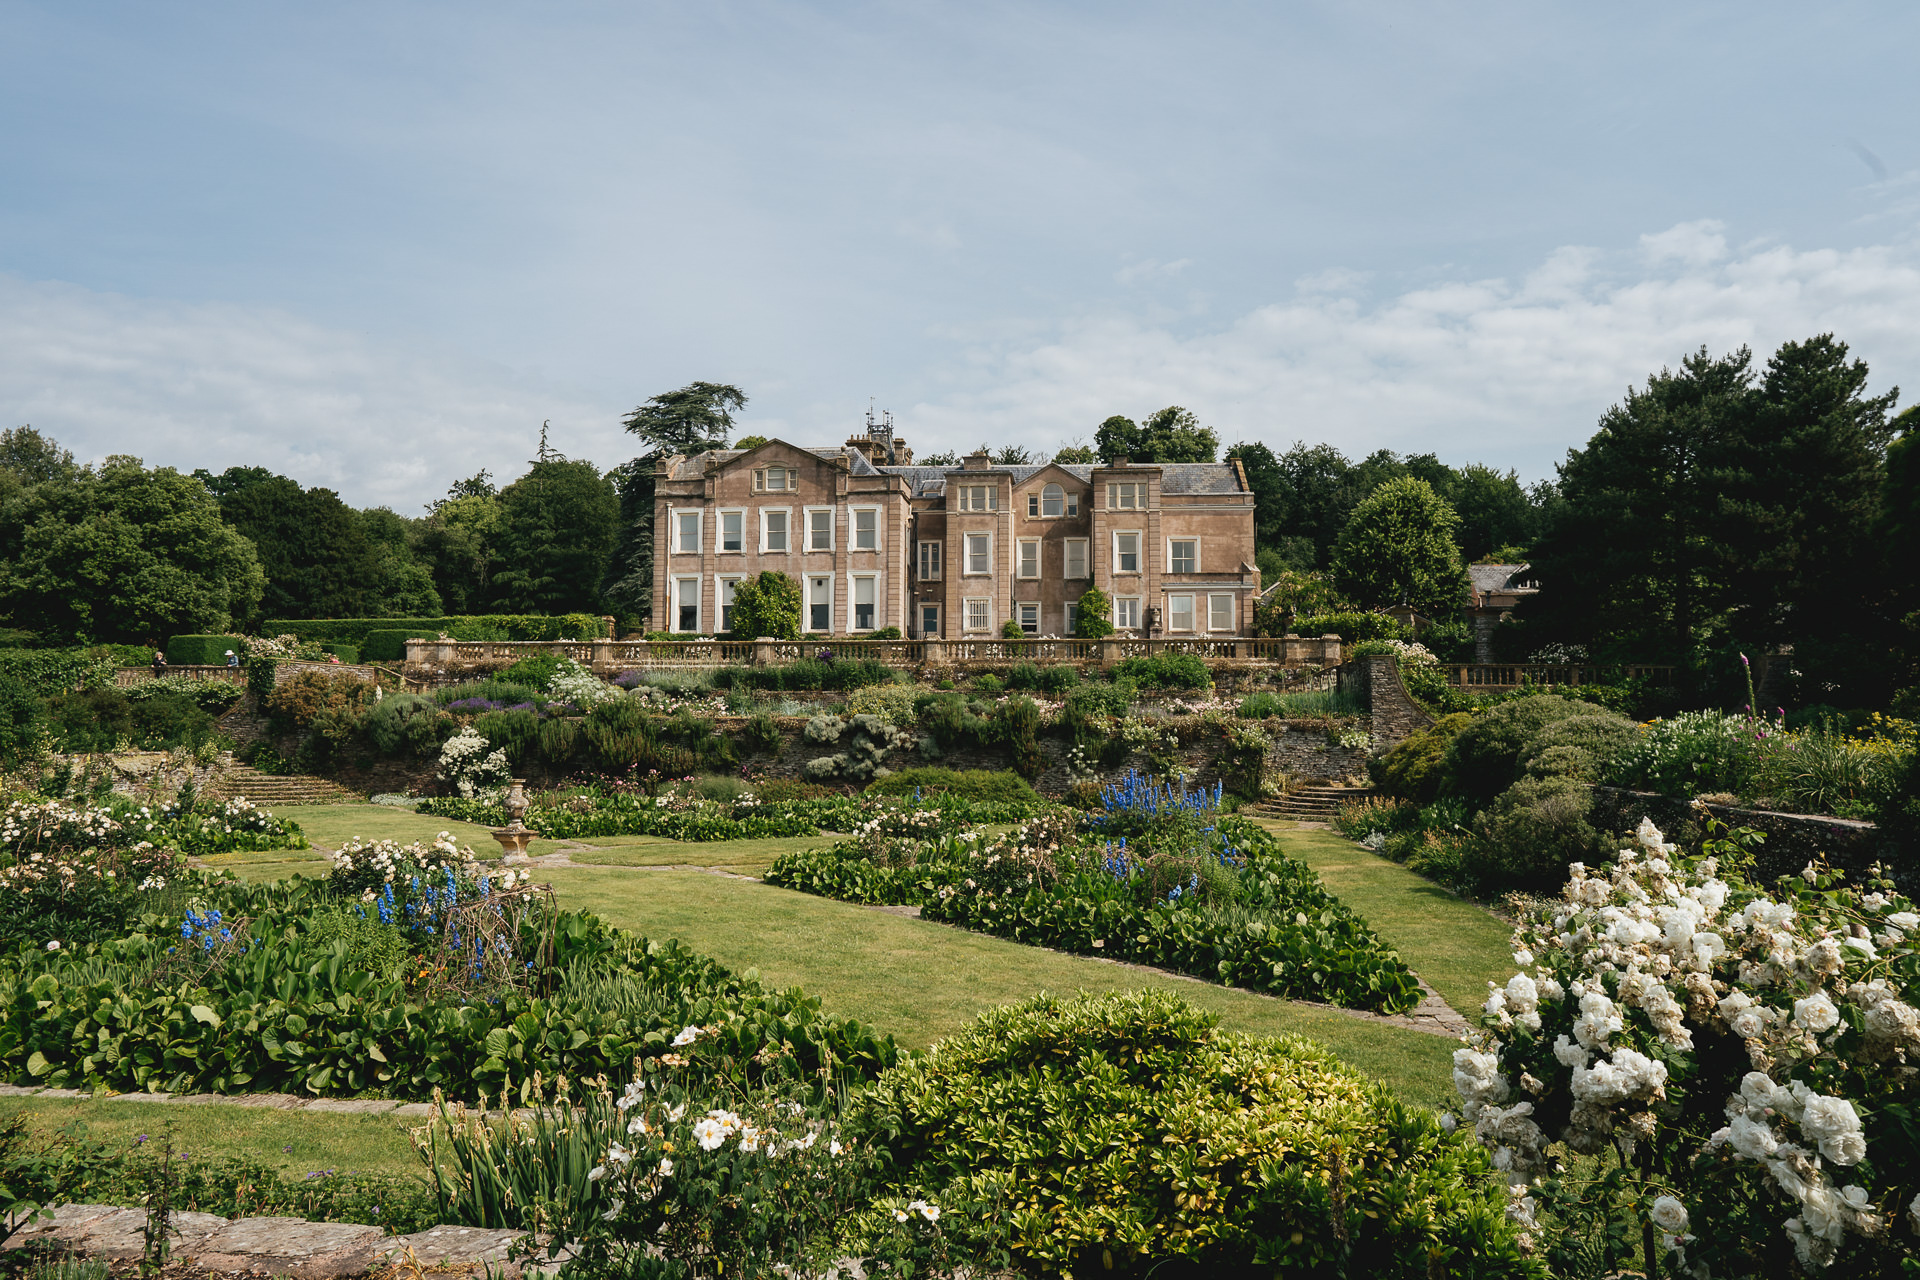 The house and gardens at Hestercombe Gardens in Somerset